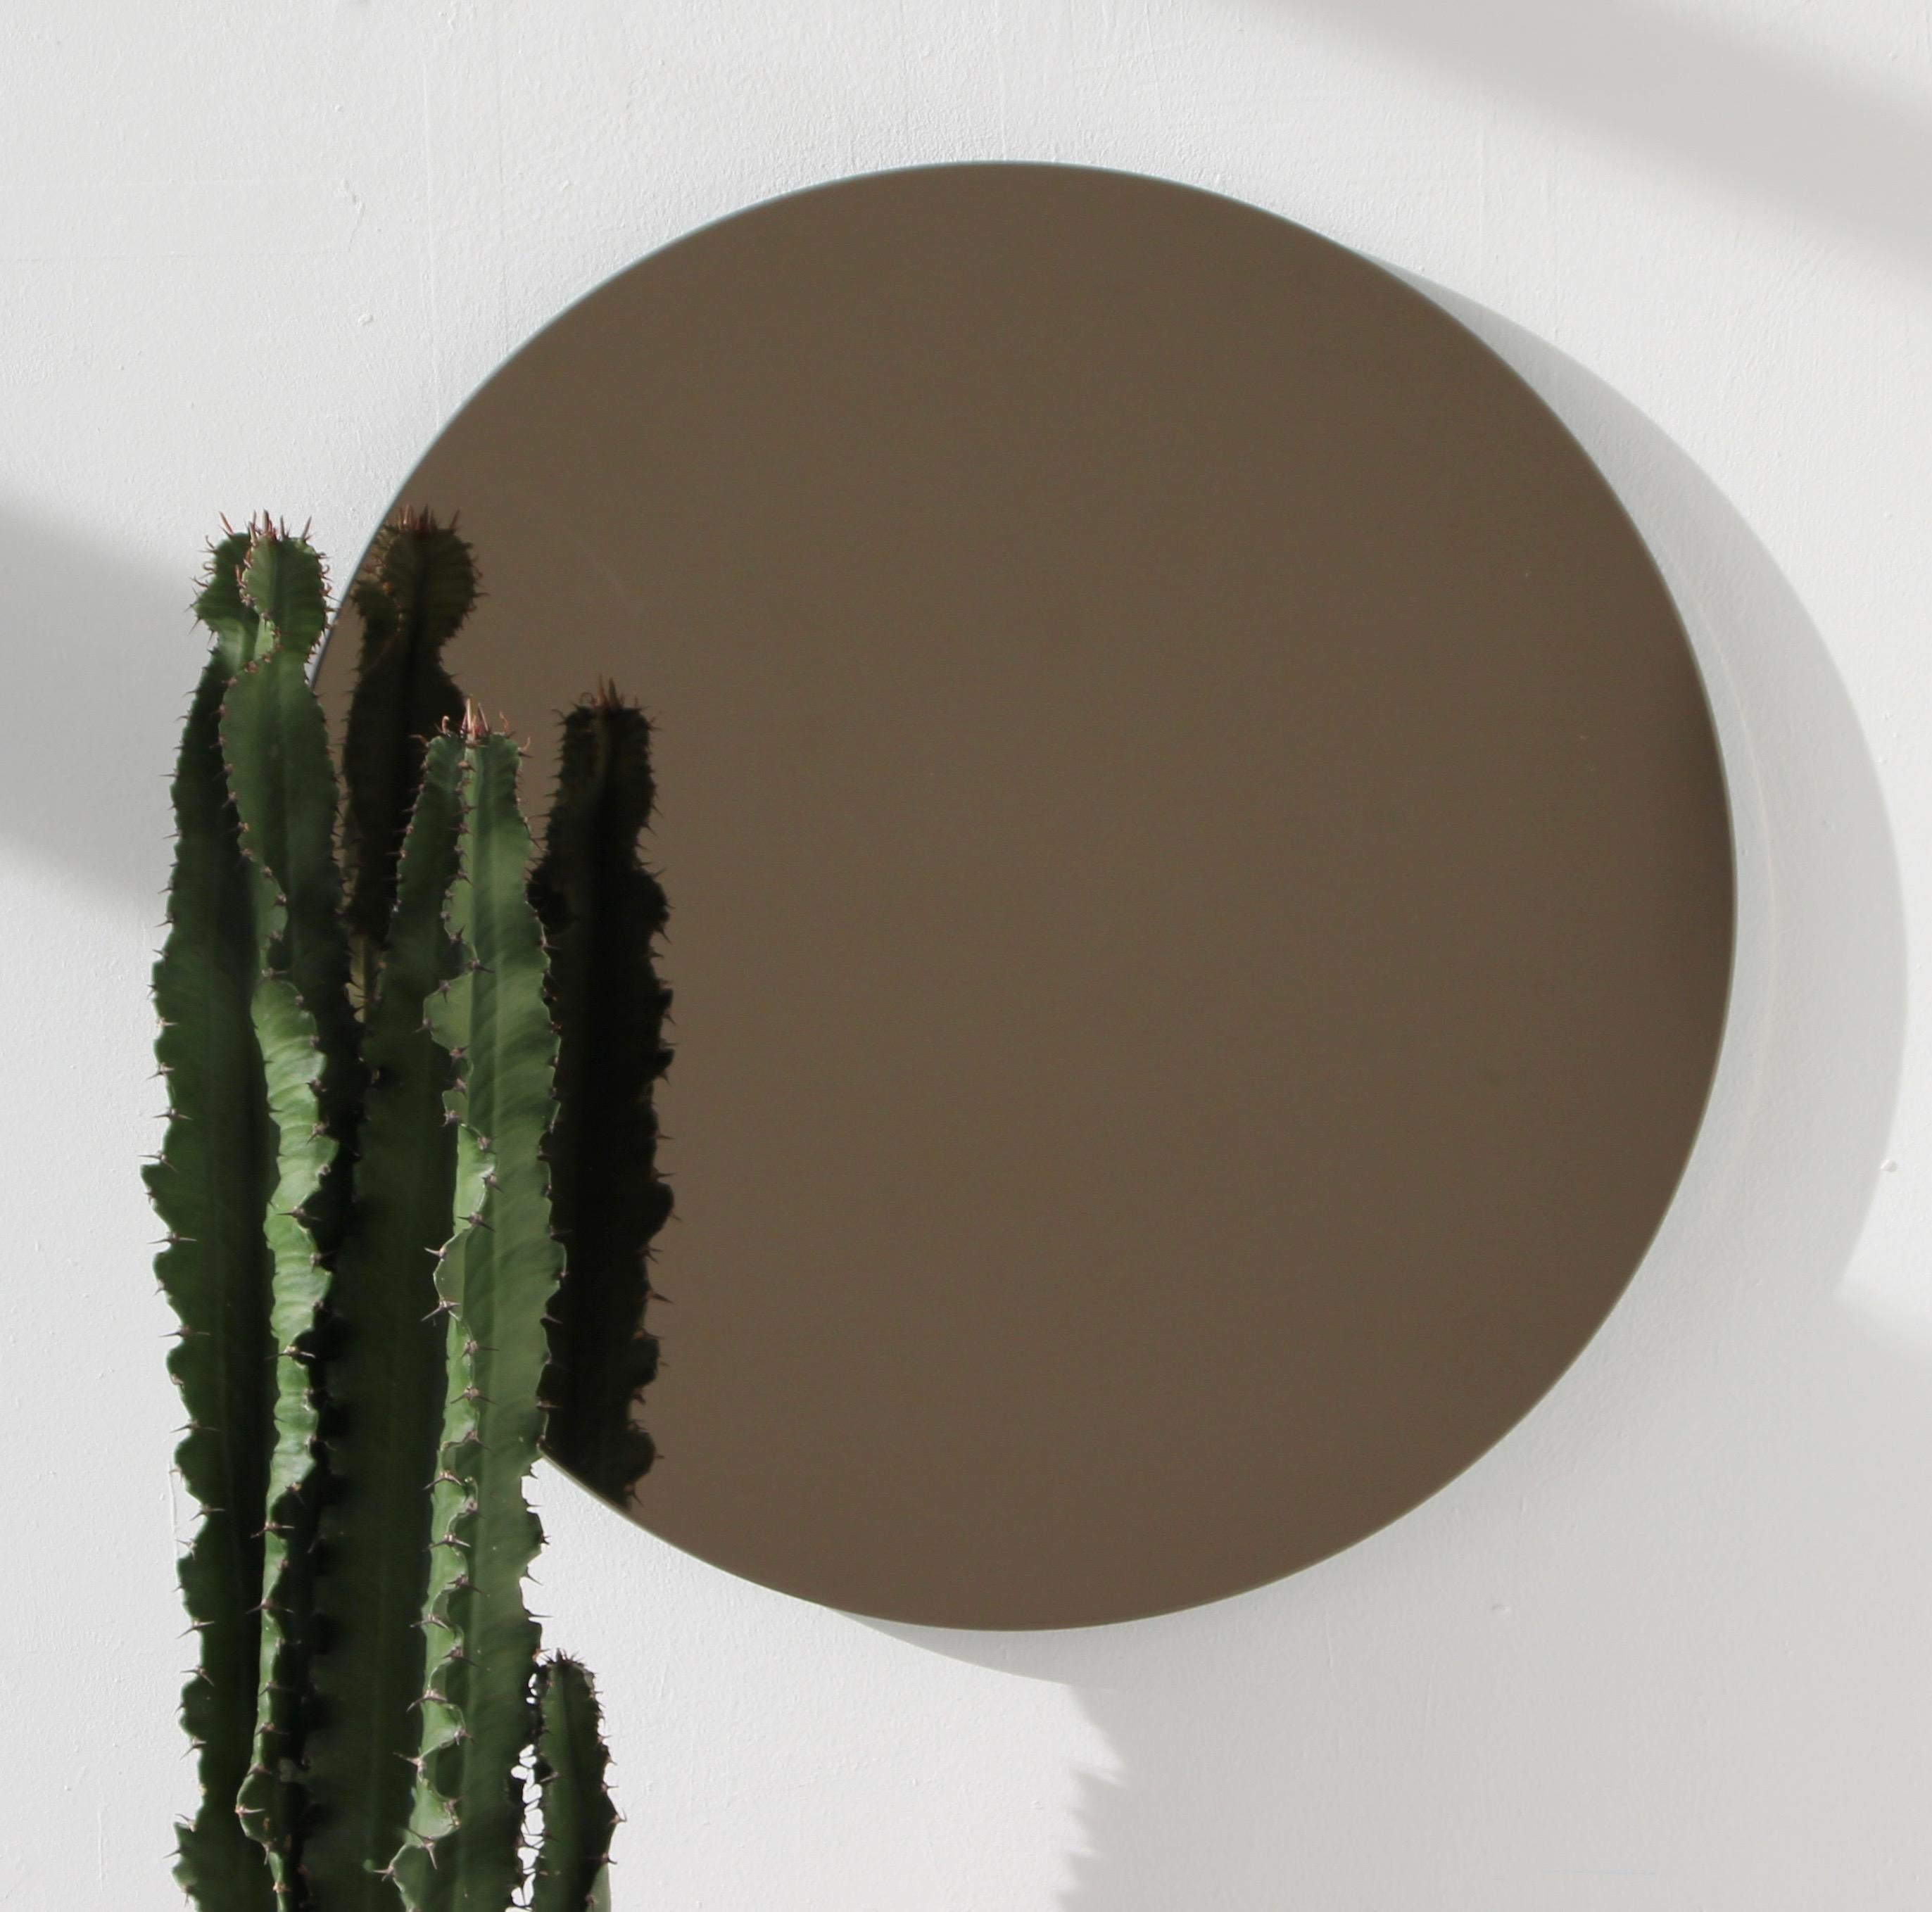 British Orbis Bronze Tinted Contemporary Round Frameless Mirror with Floating Effect, XL For Sale